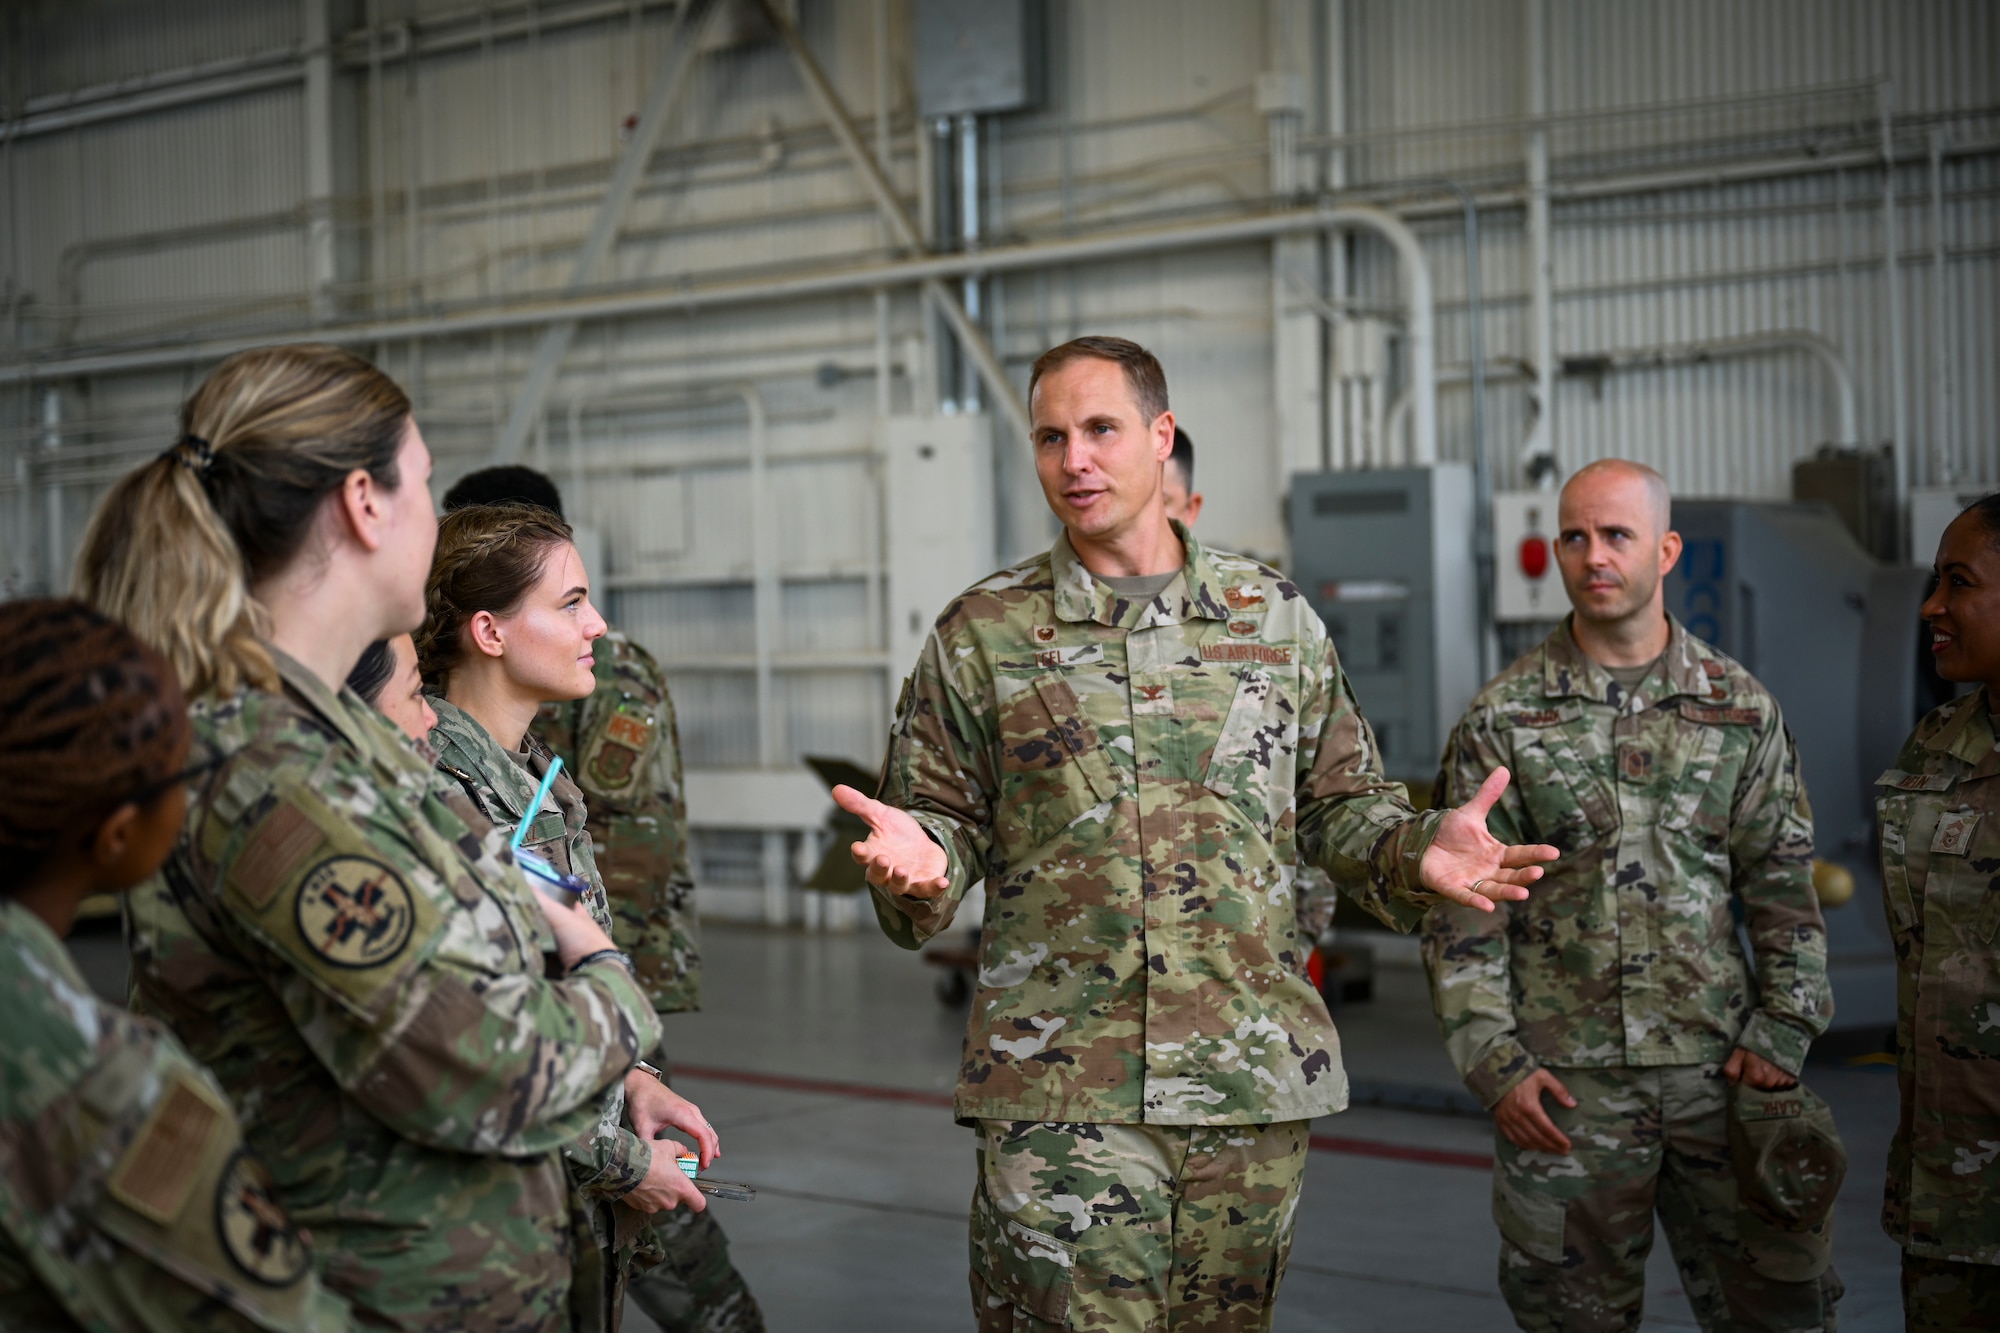 Col. Lucas Teel, second from right, 4th Fighter Wing commander, talks to Airmen at a quarterly load crew competition at Seymour Johnson Air Force Base, North Carolina, July 15, 2022. The competition was held to build morale and test the load crews loading capabilities. (U.S. Air Force photo by Senior Airman David Lynn)